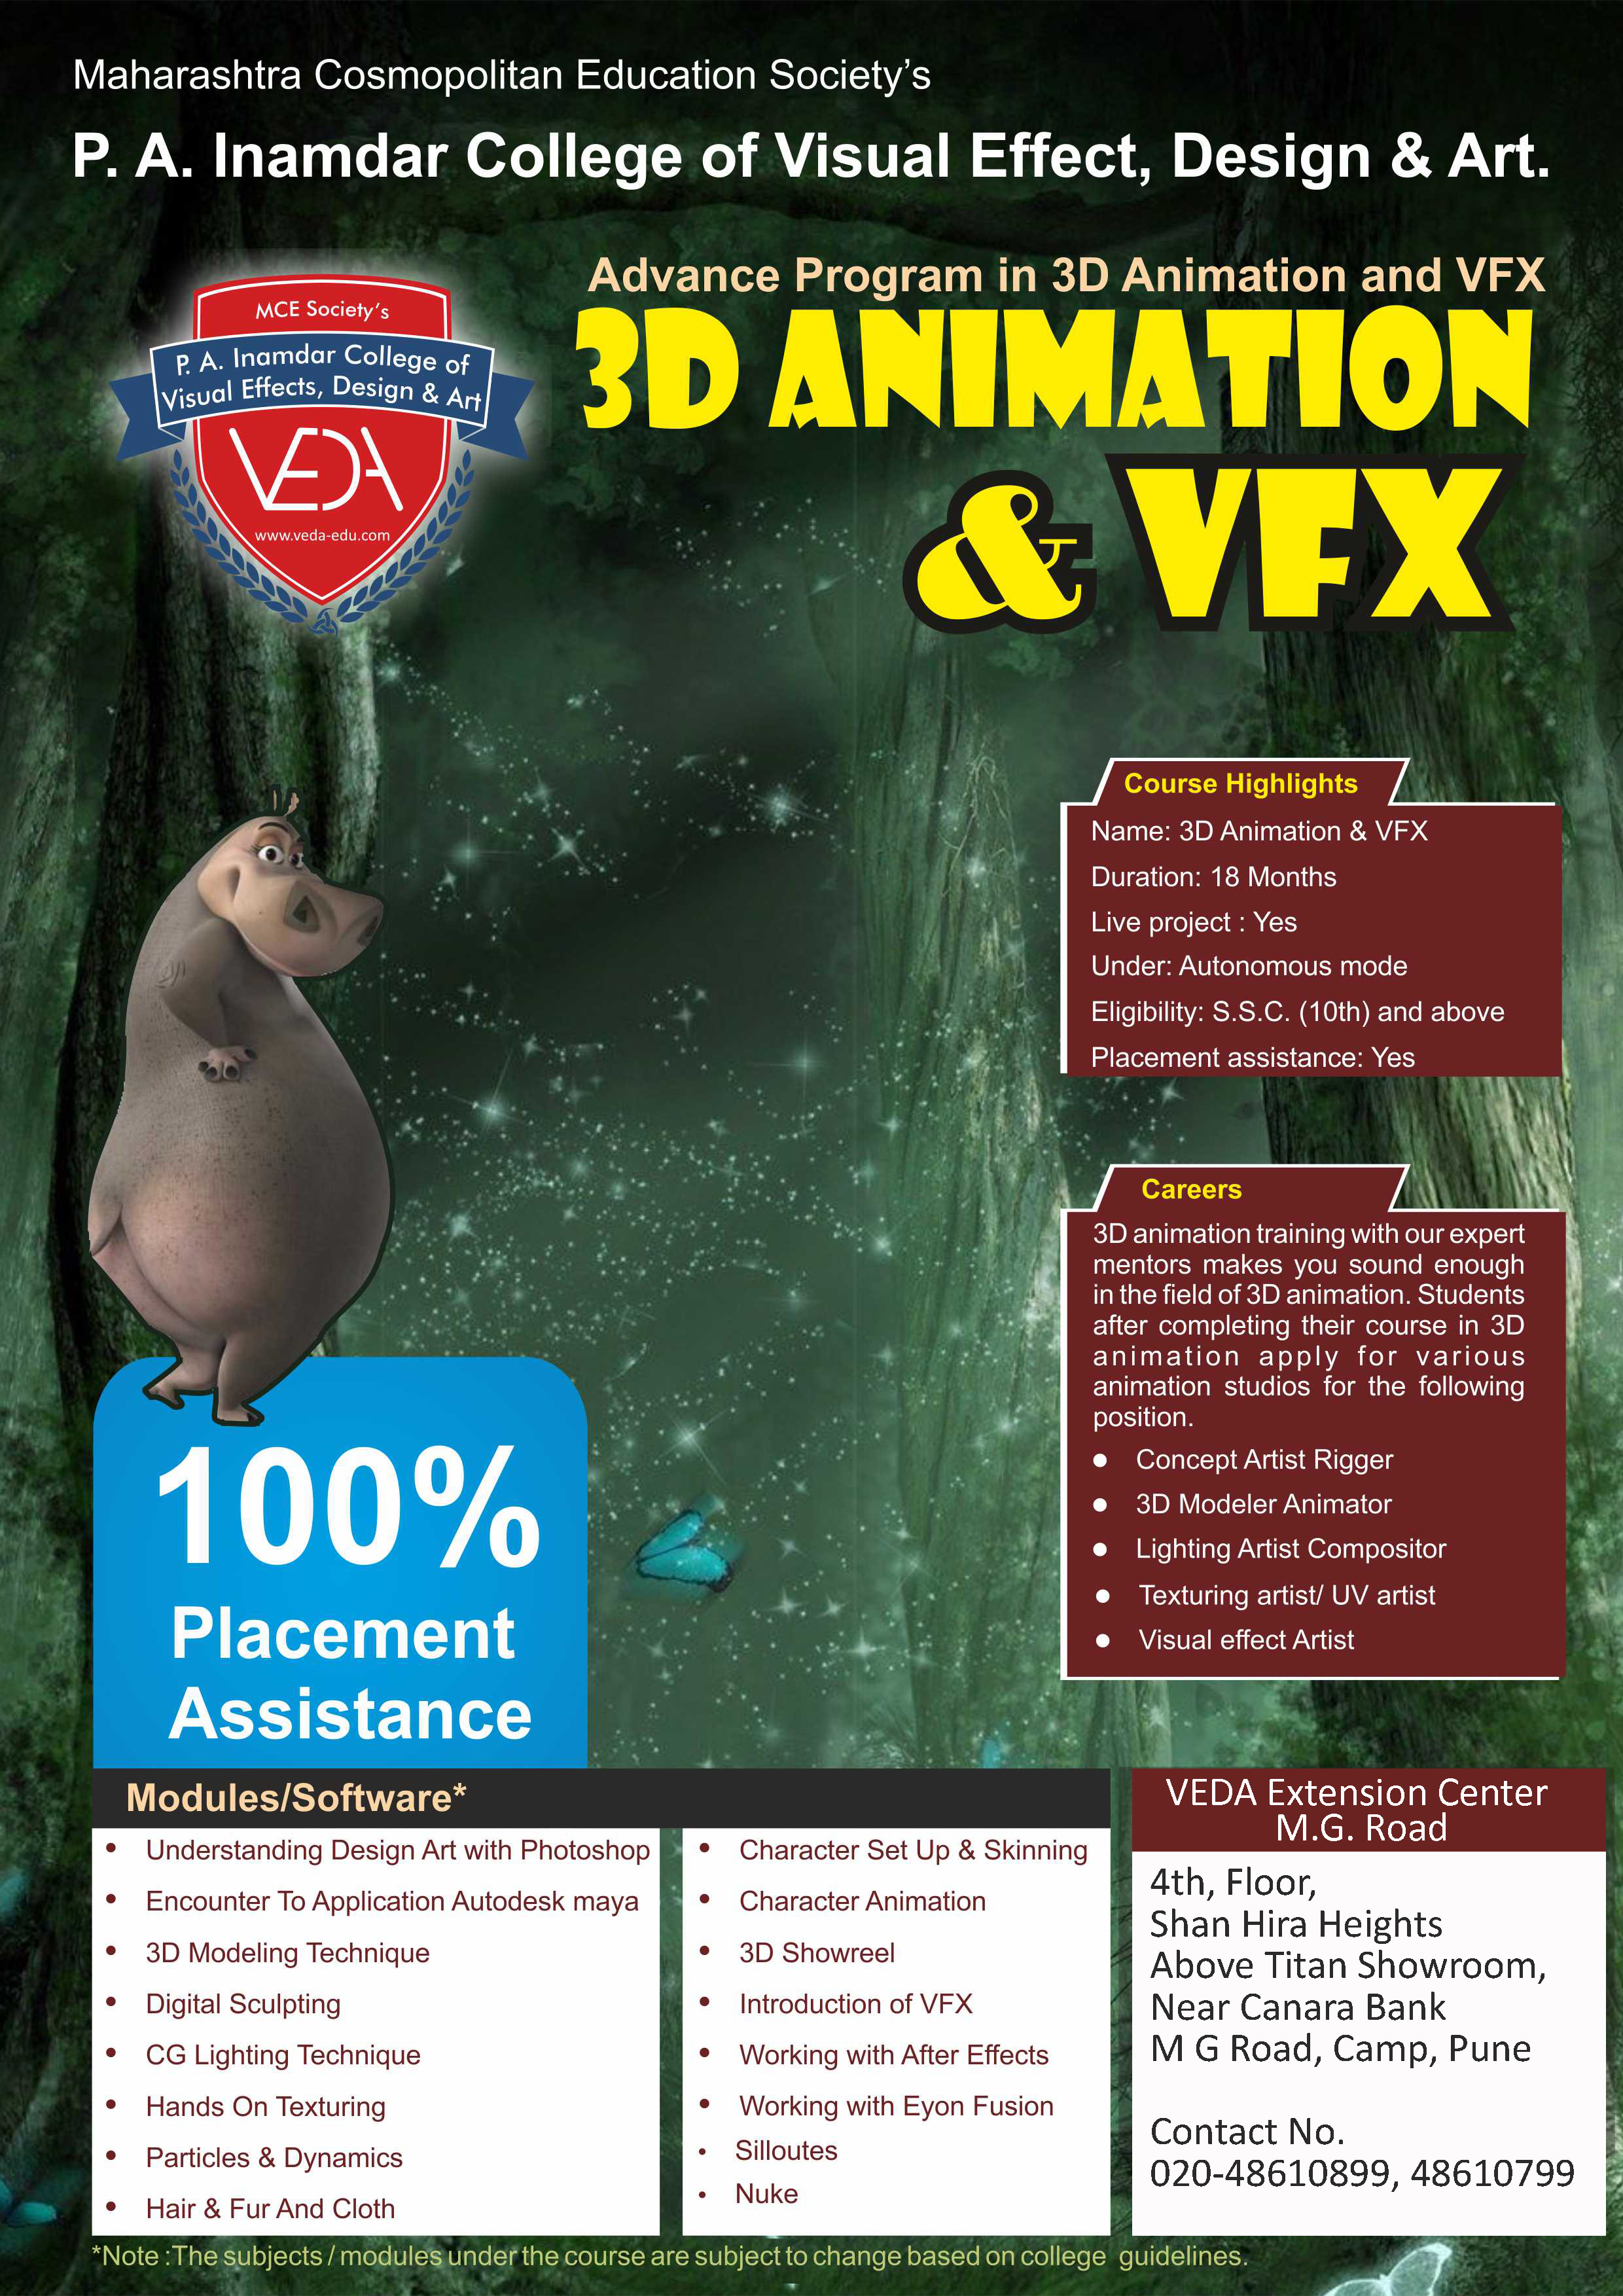 vfx course in Pune 